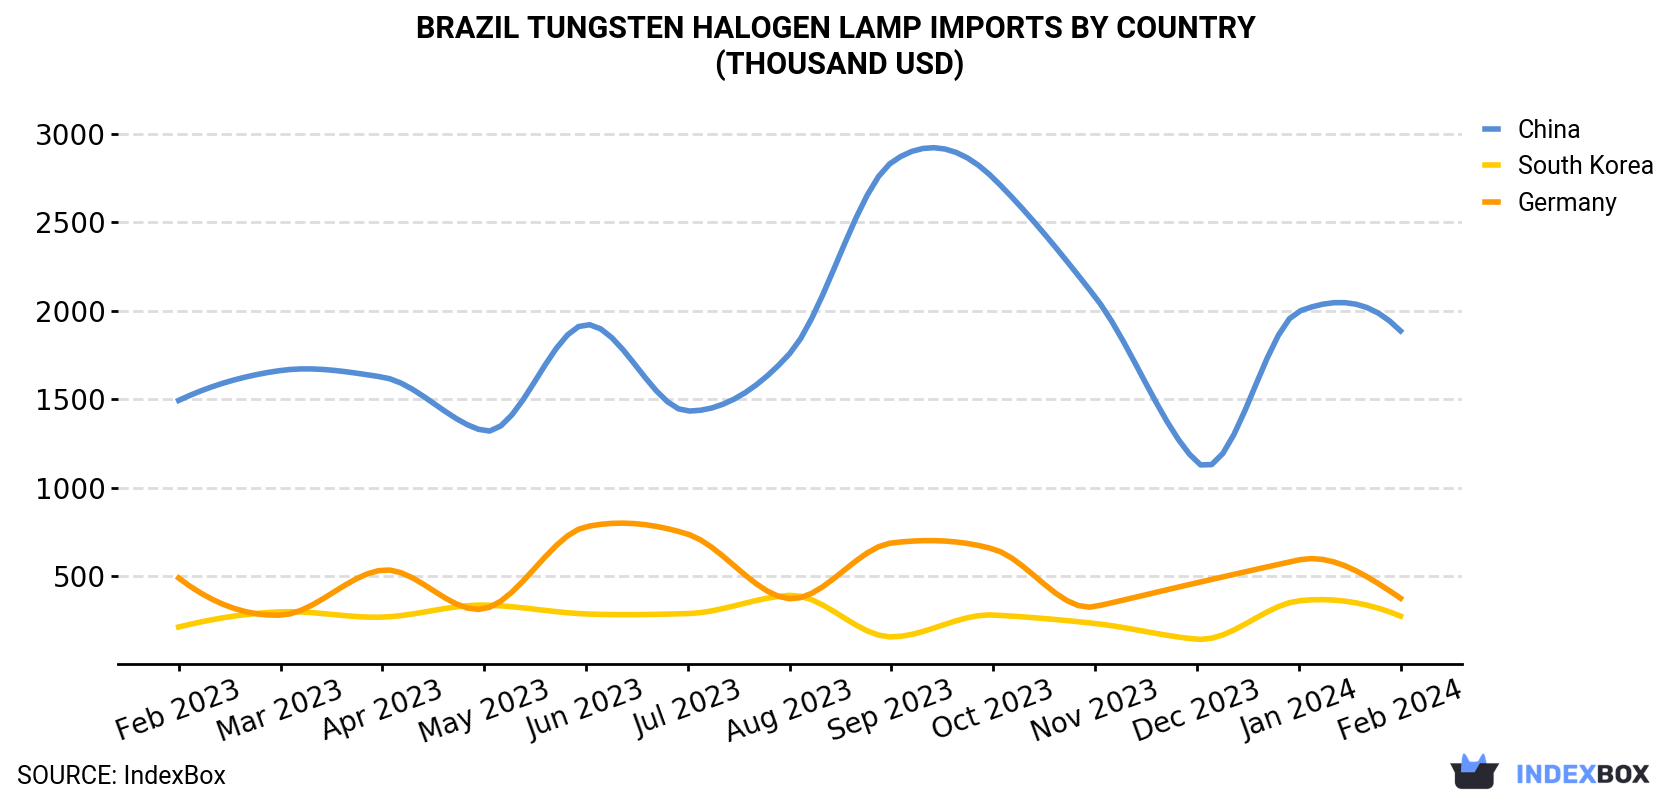 Brazil Tungsten Halogen Lamp Imports By Country (Thousand USD)